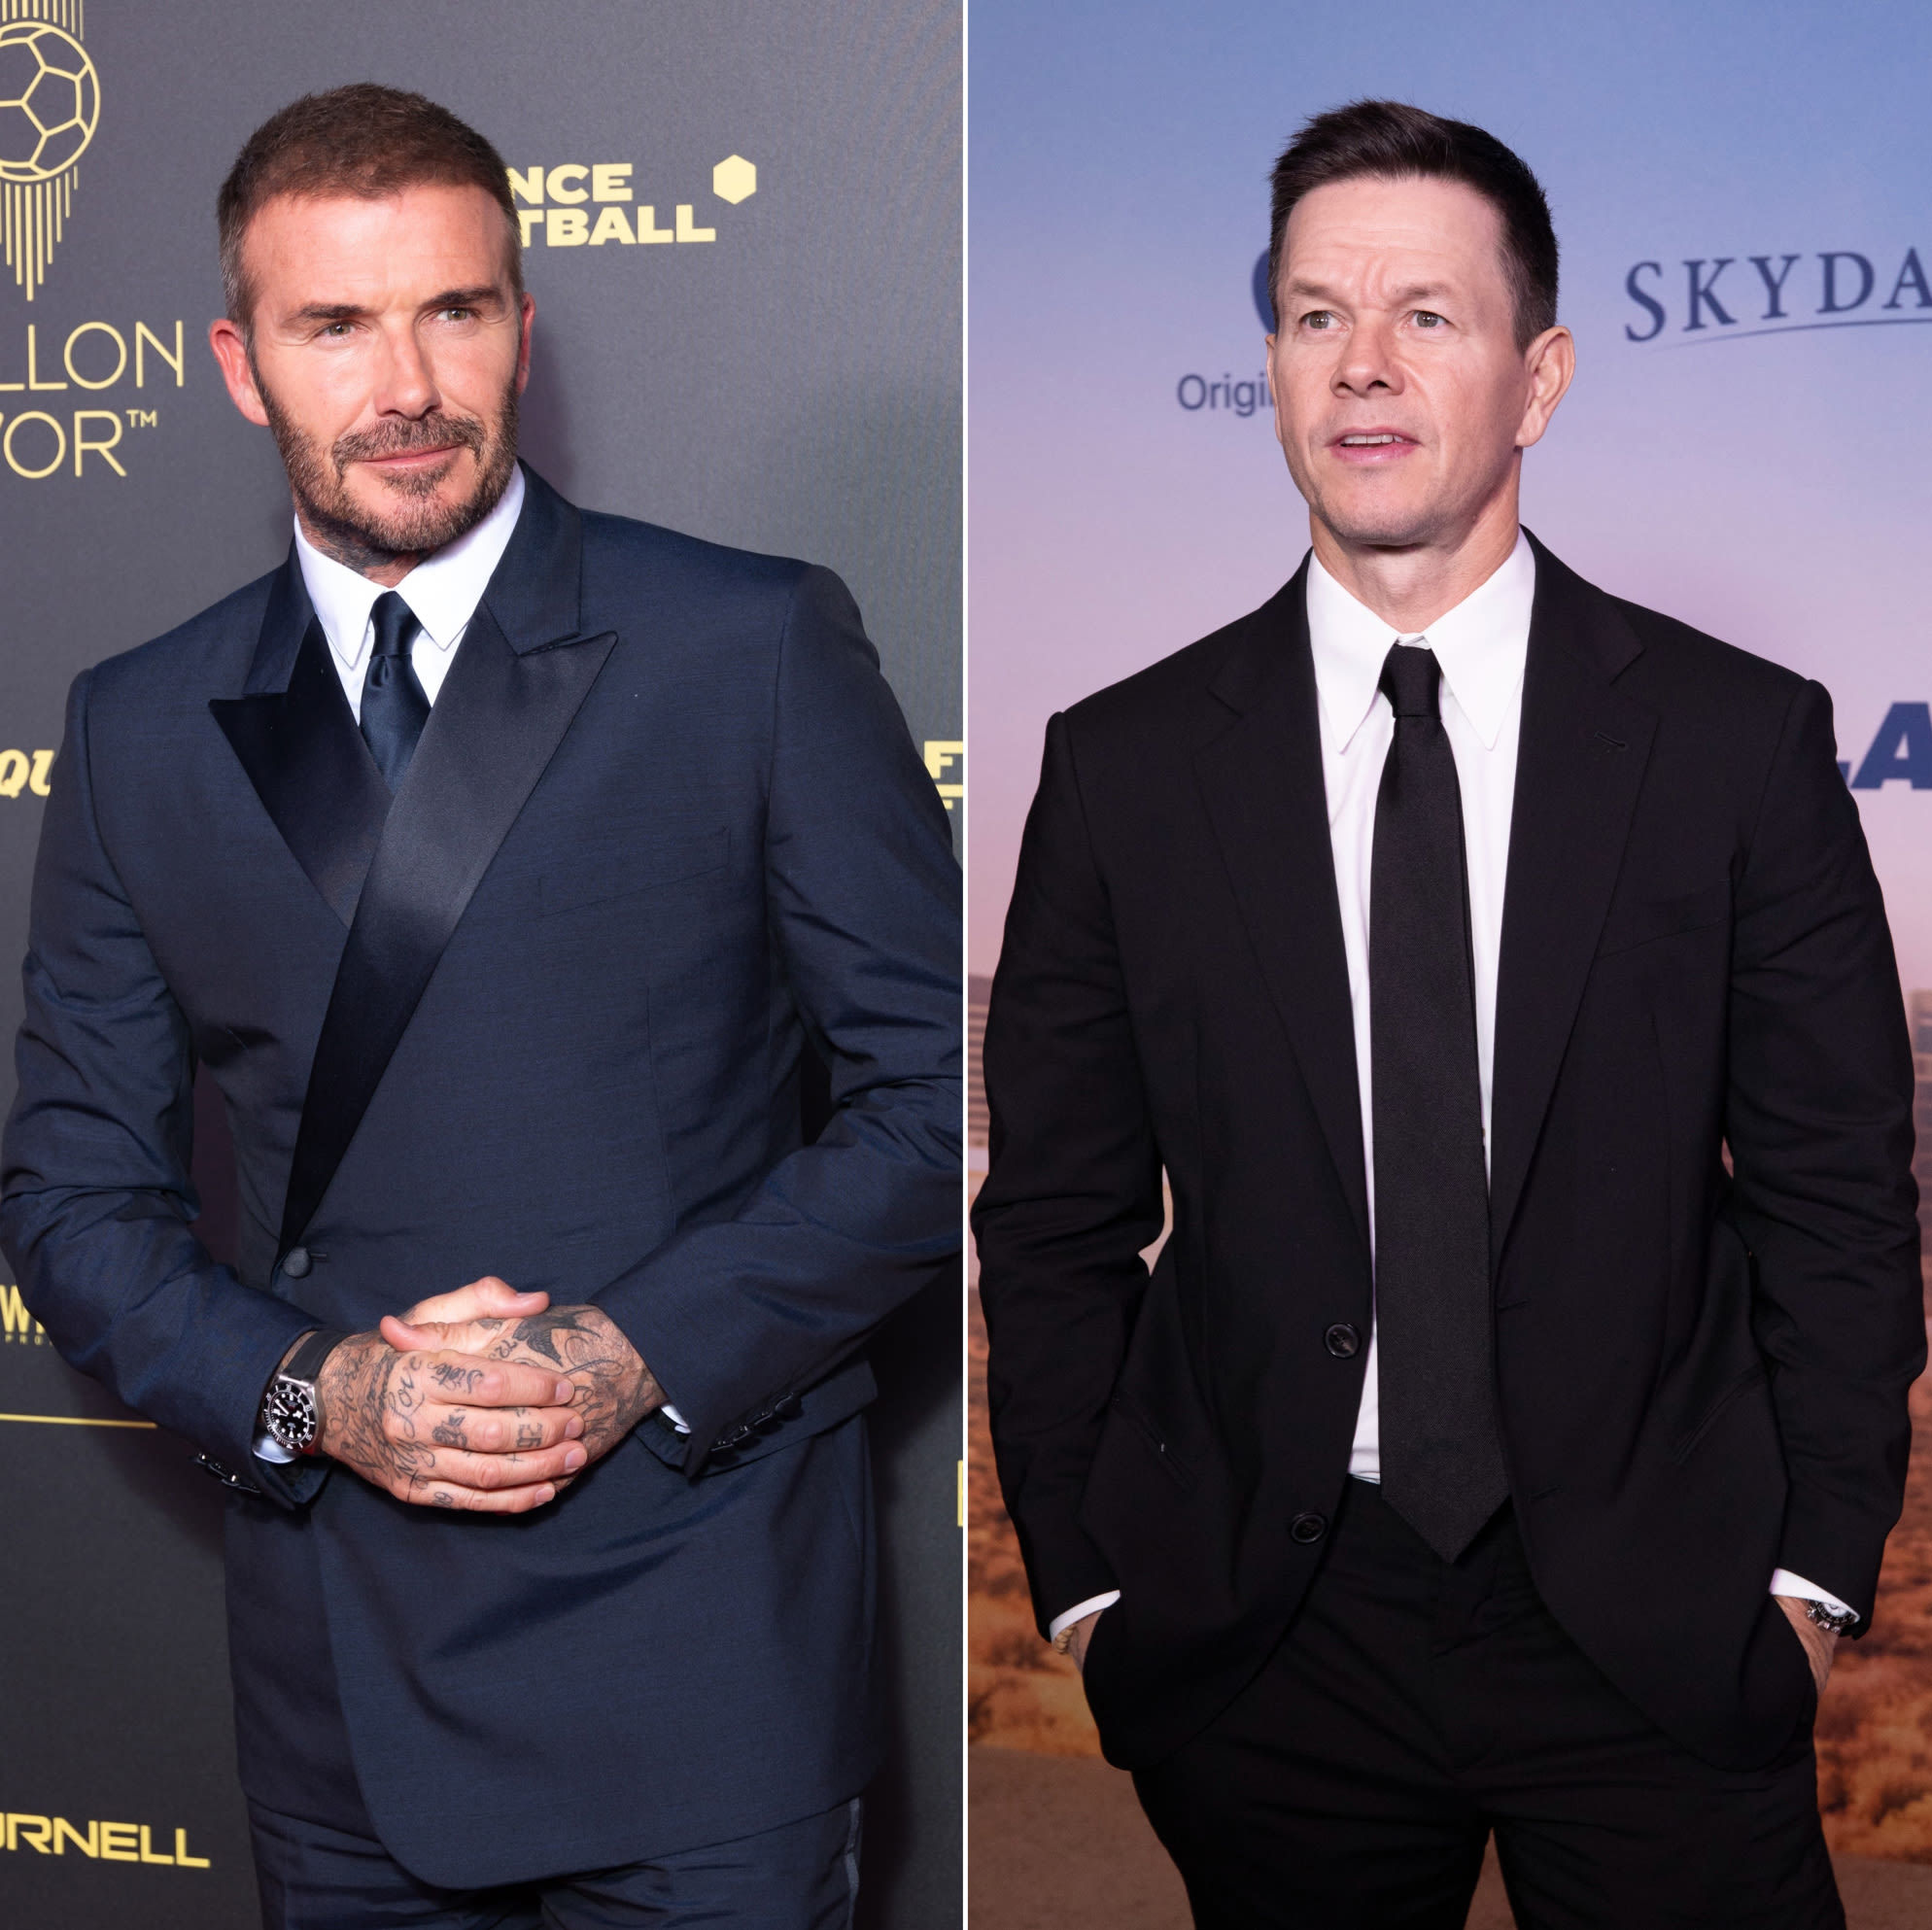 Revisiting David Beckham and Mark Wahlberg’s Relationship Amid Lawsuit